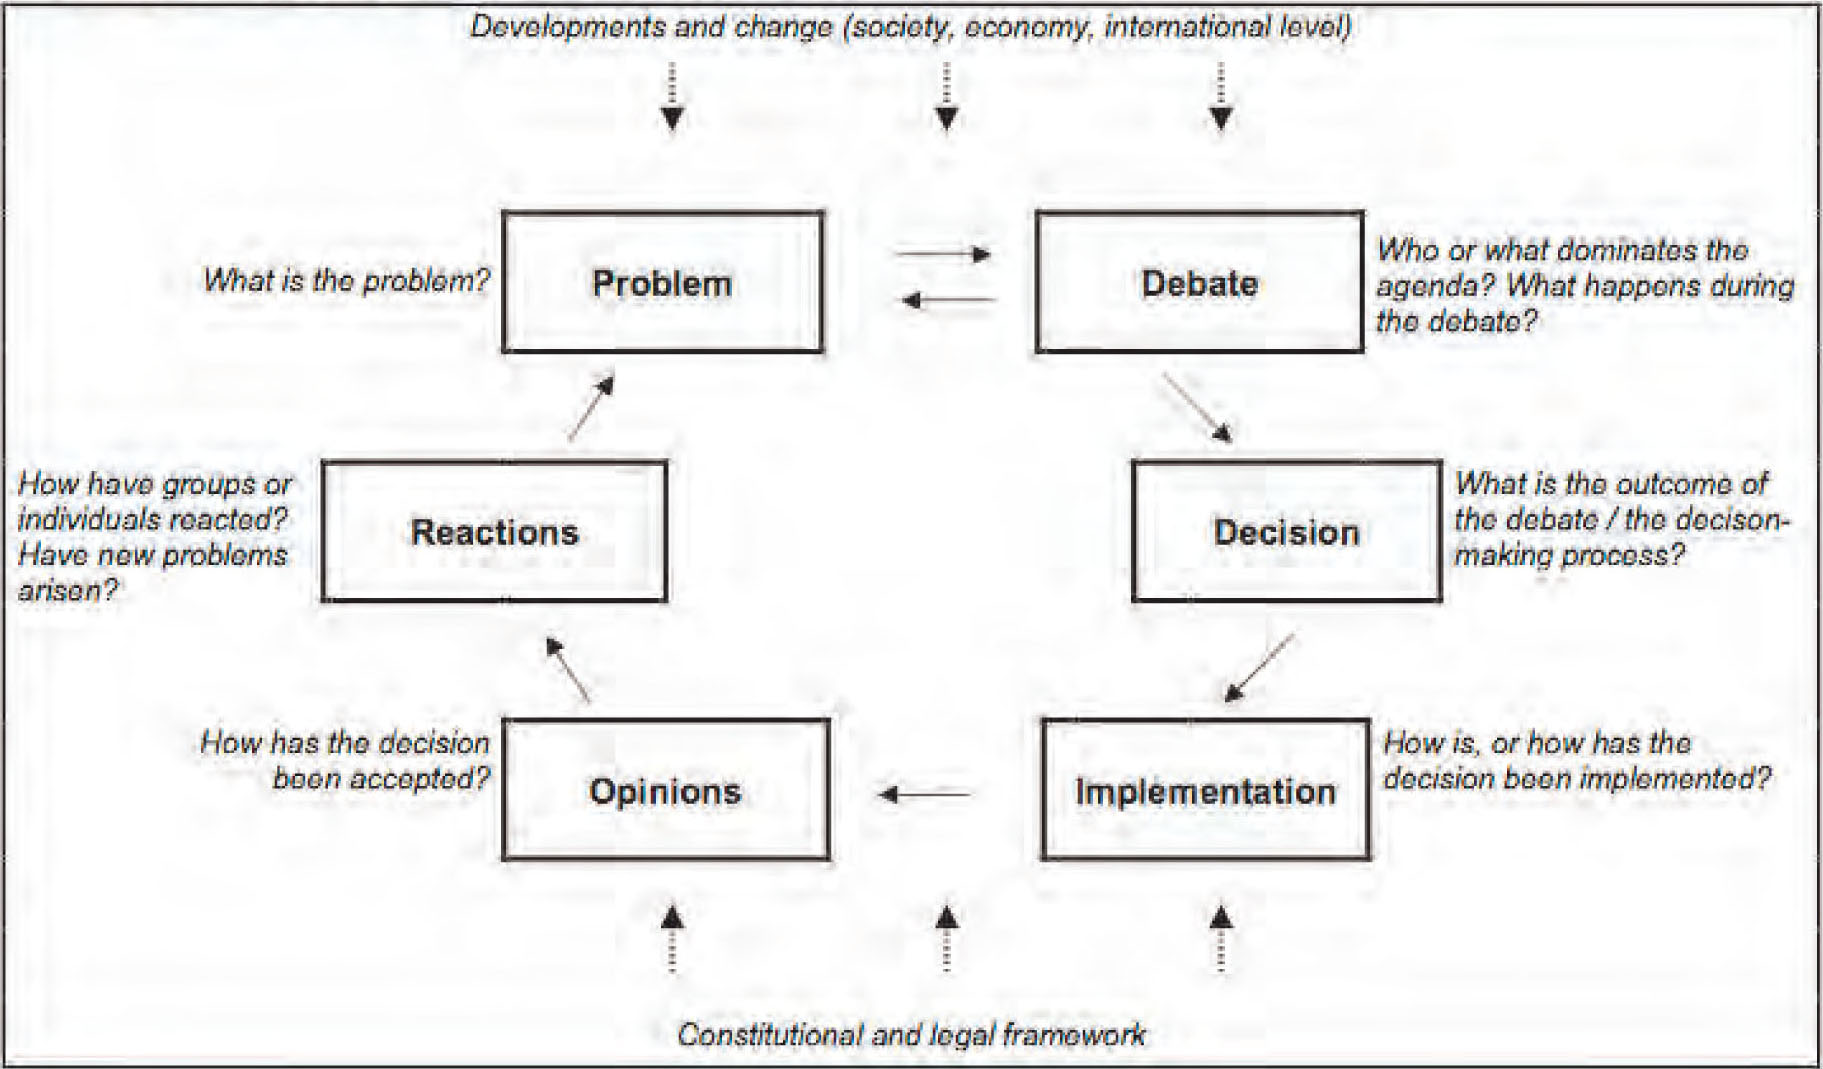 policy process model